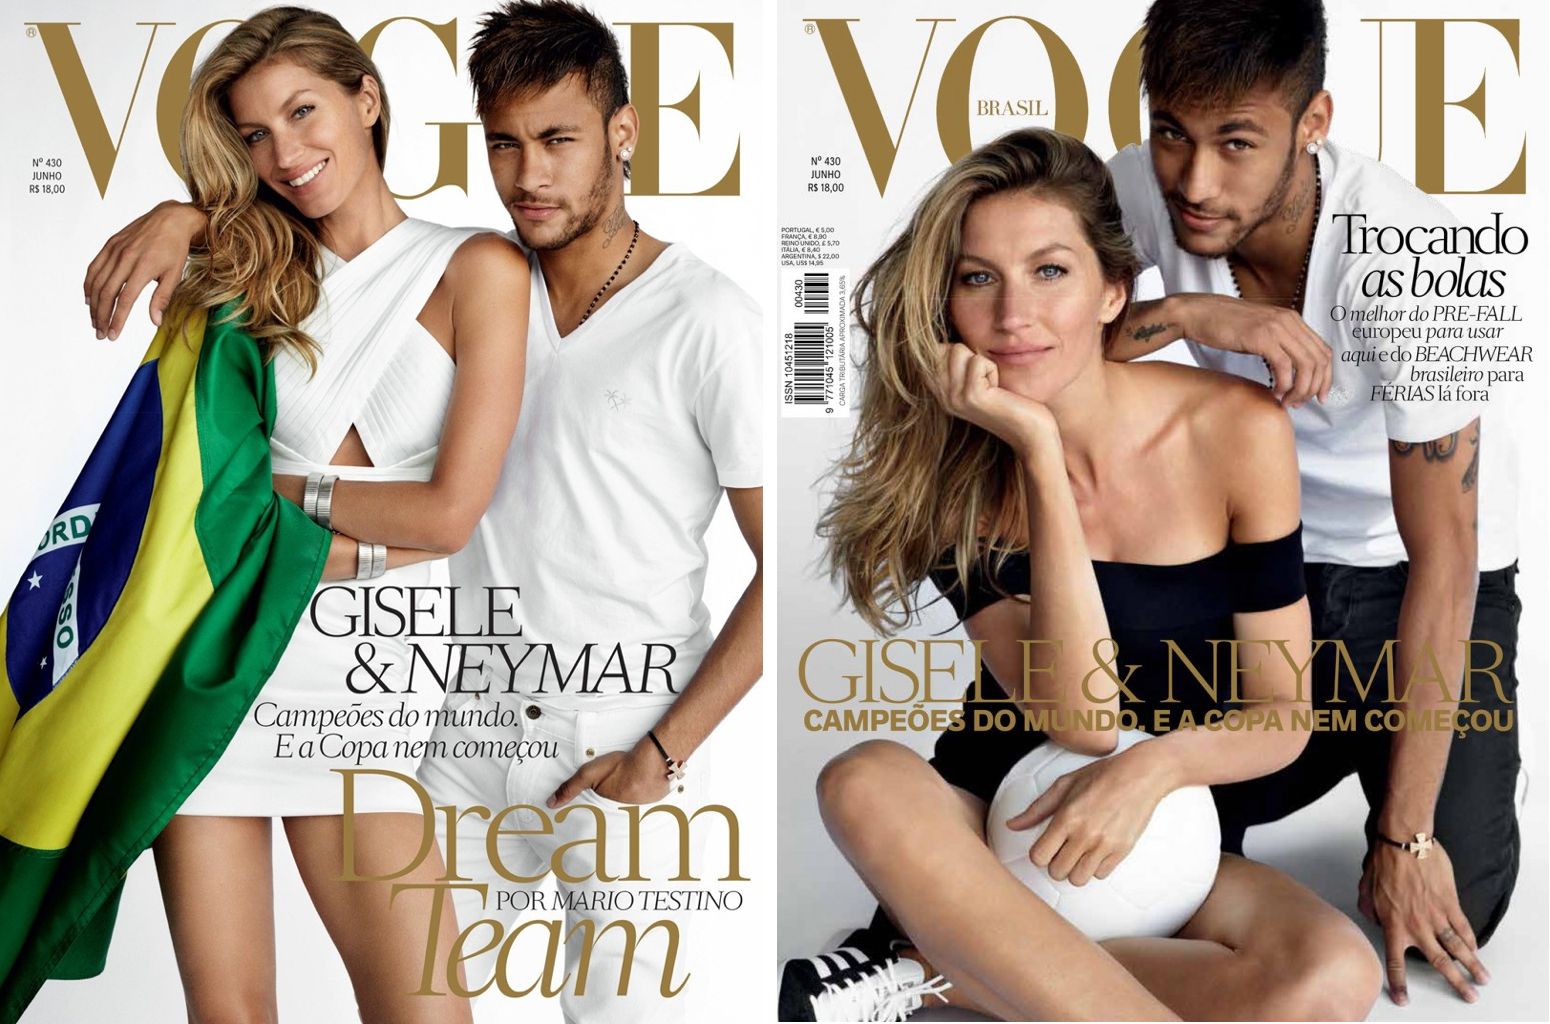 Gisele Bündchen and Neymar on the June 2014 issue of Vogue Brazil